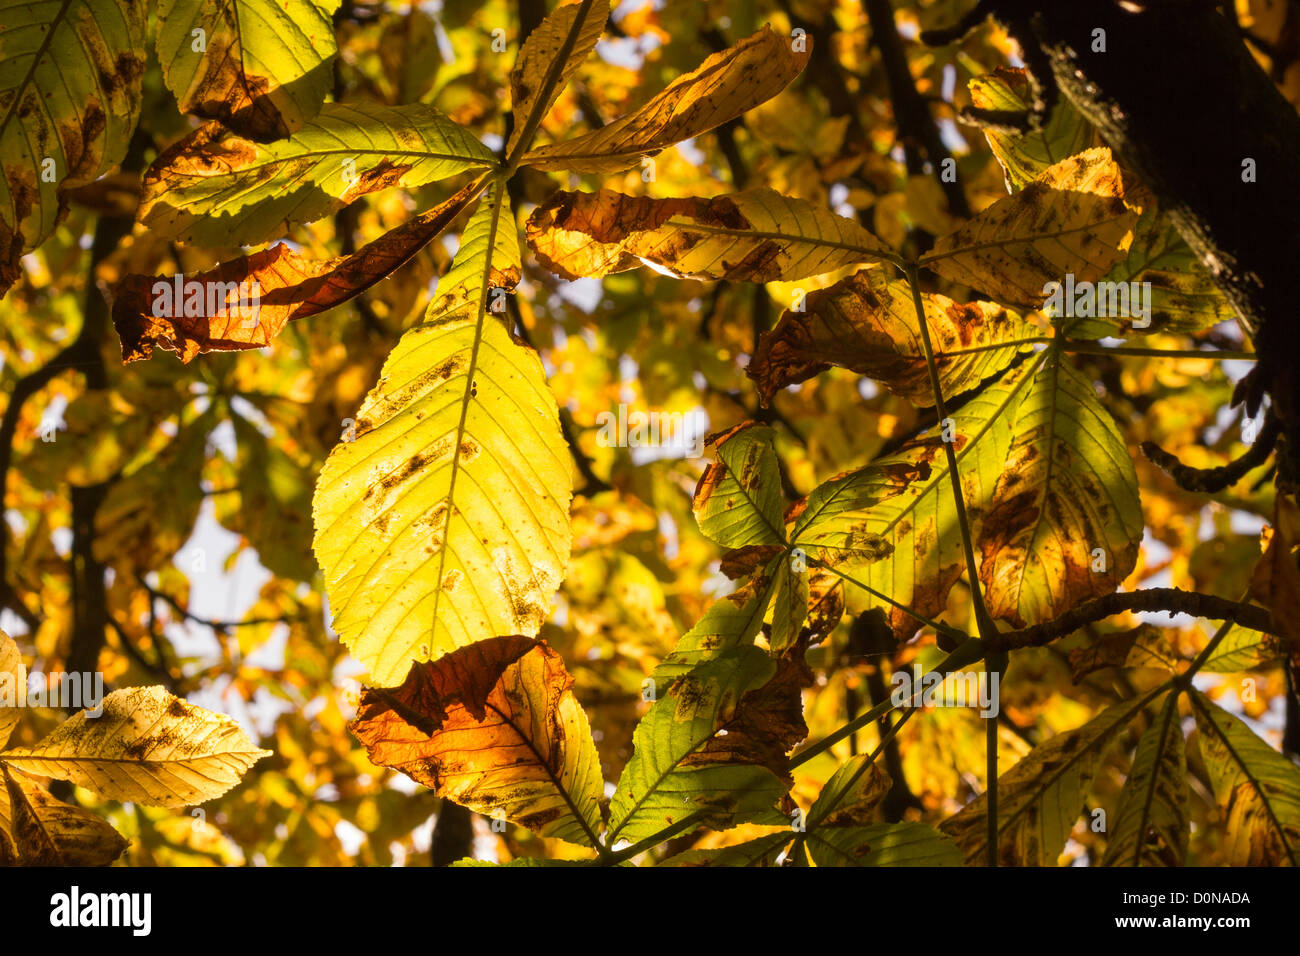 Autumn sunshine shinning through the leaves of trees in woodland in a park Stock Photo